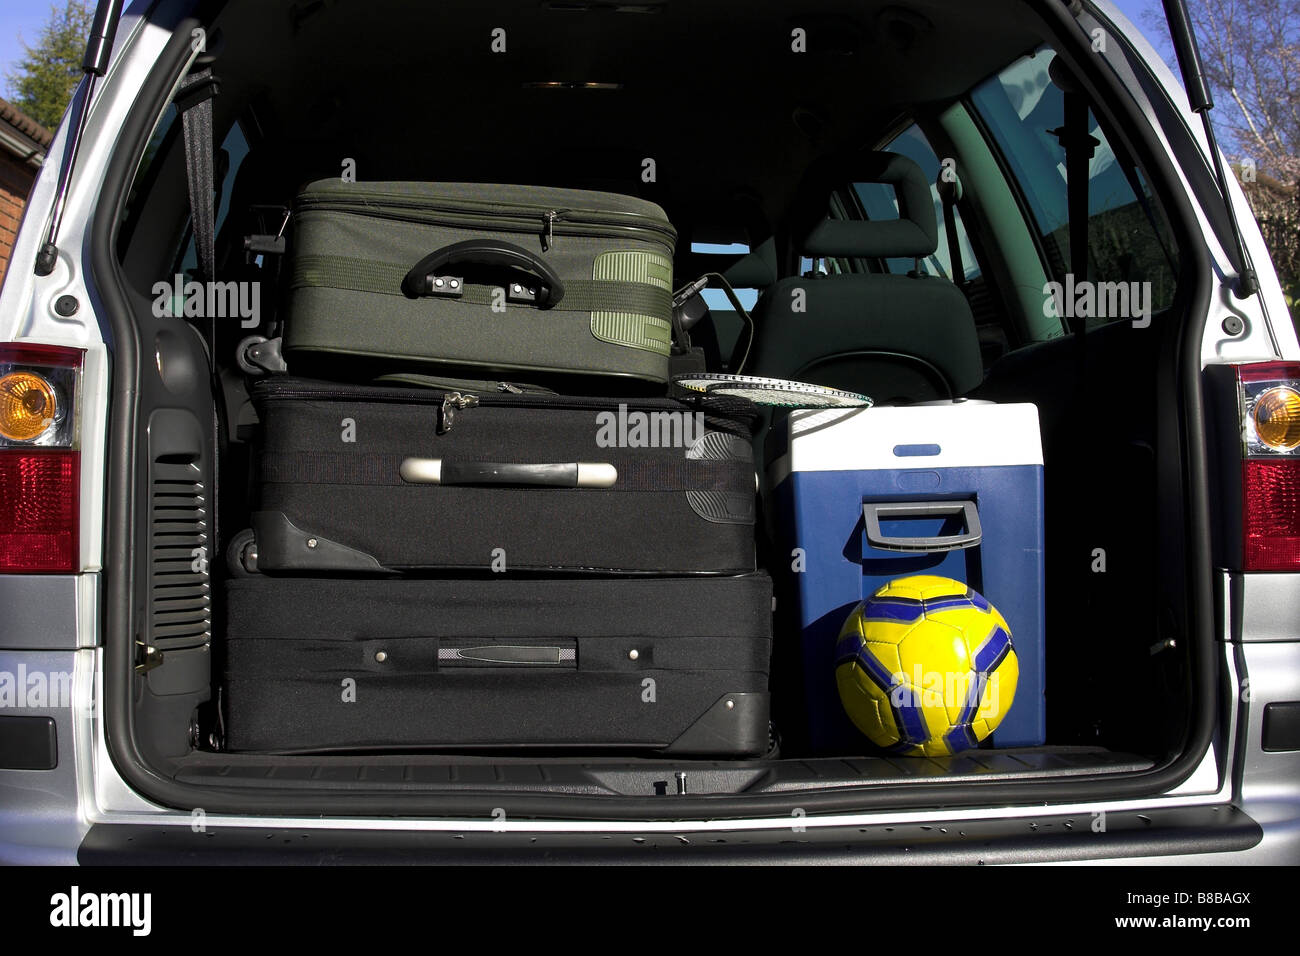 Holiday luggage in the boot of a family car. Stock Photo